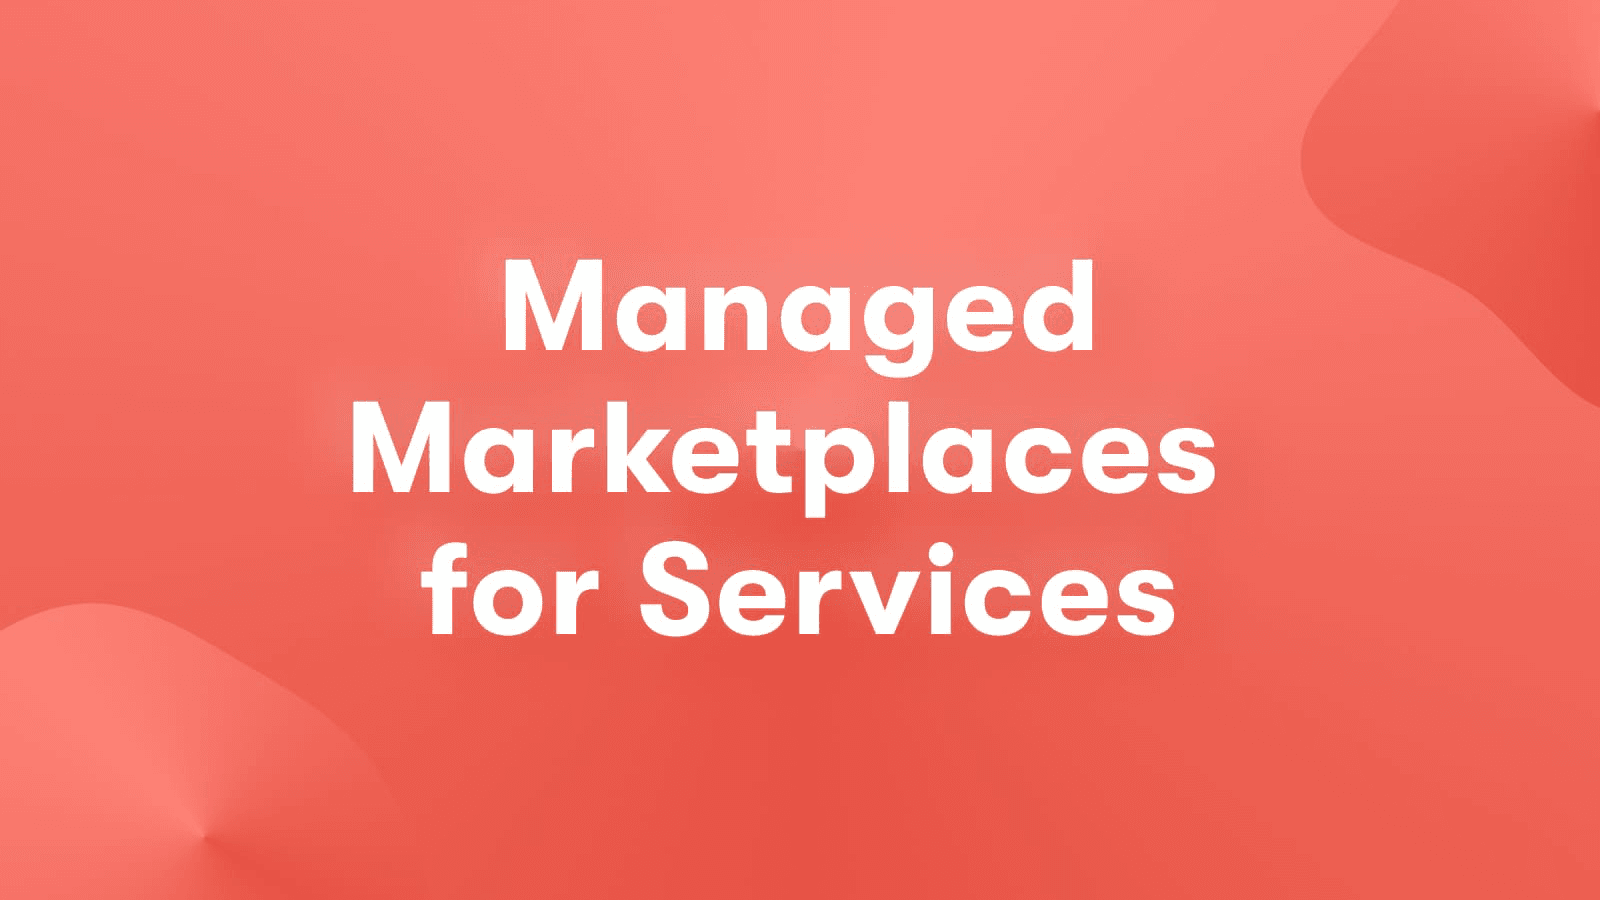 Managed marketplace for services